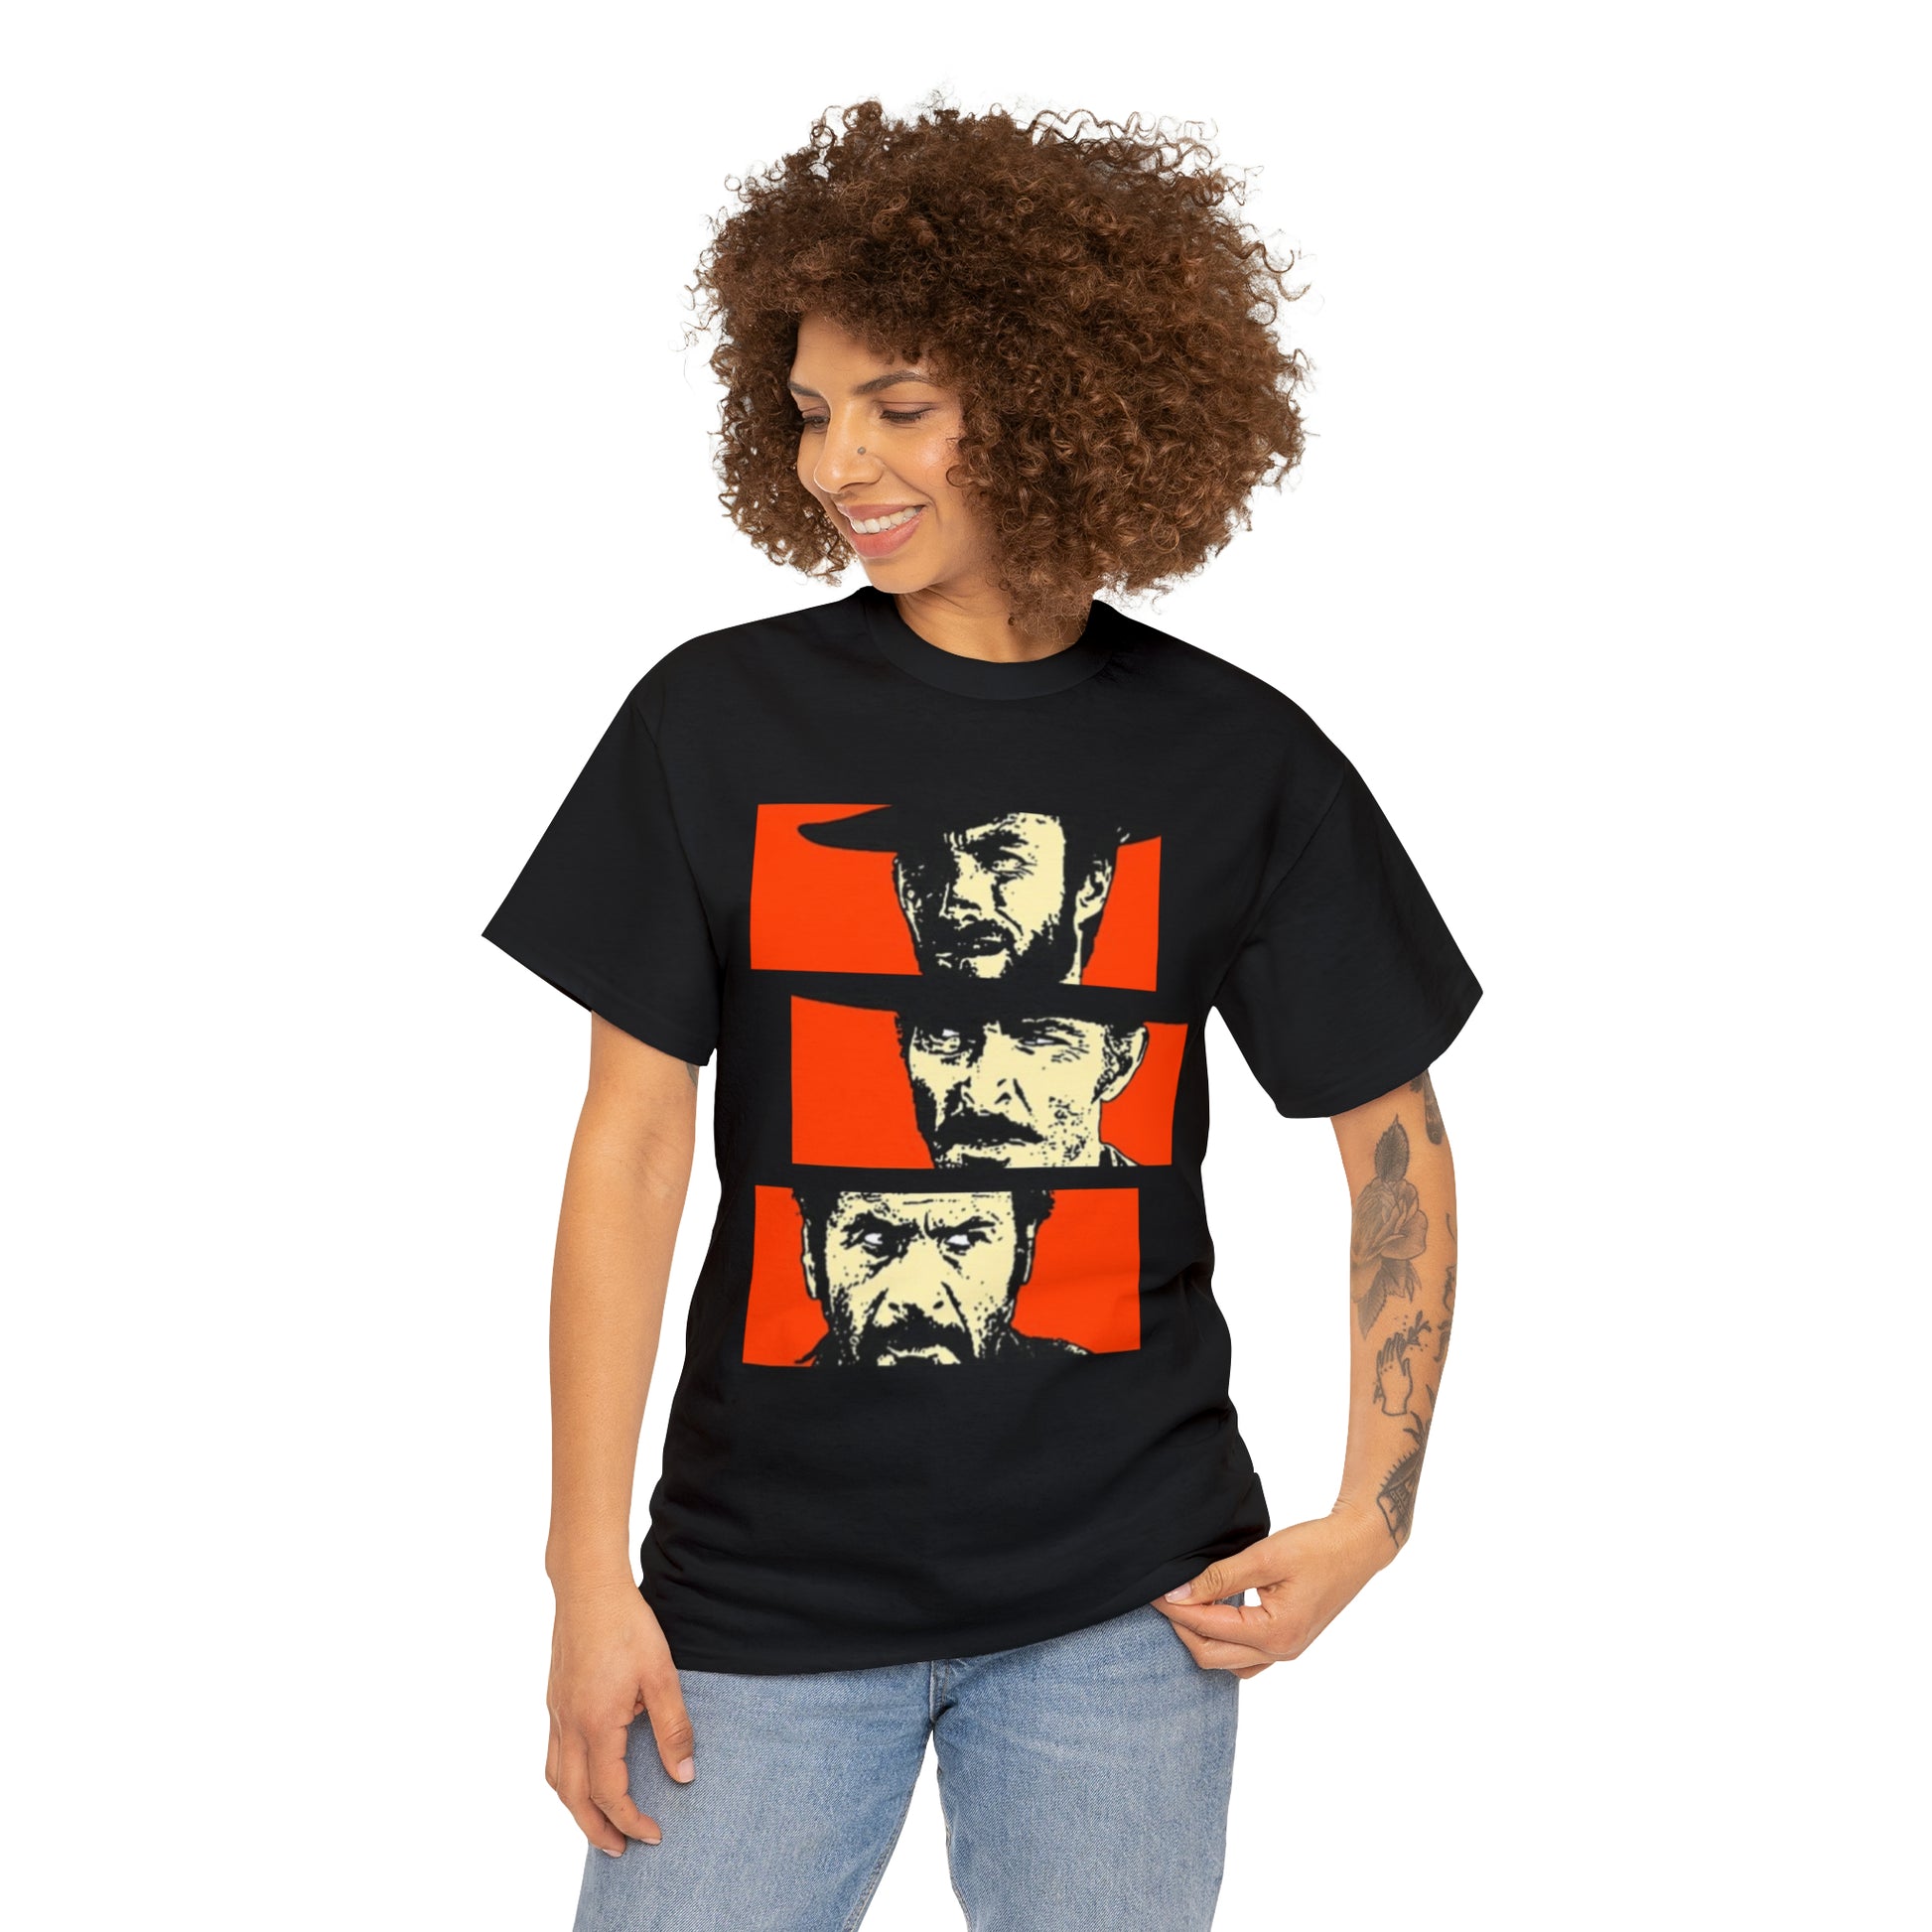 The Good, Bad and Ugly - Unisex T-Shirt Looper Tees